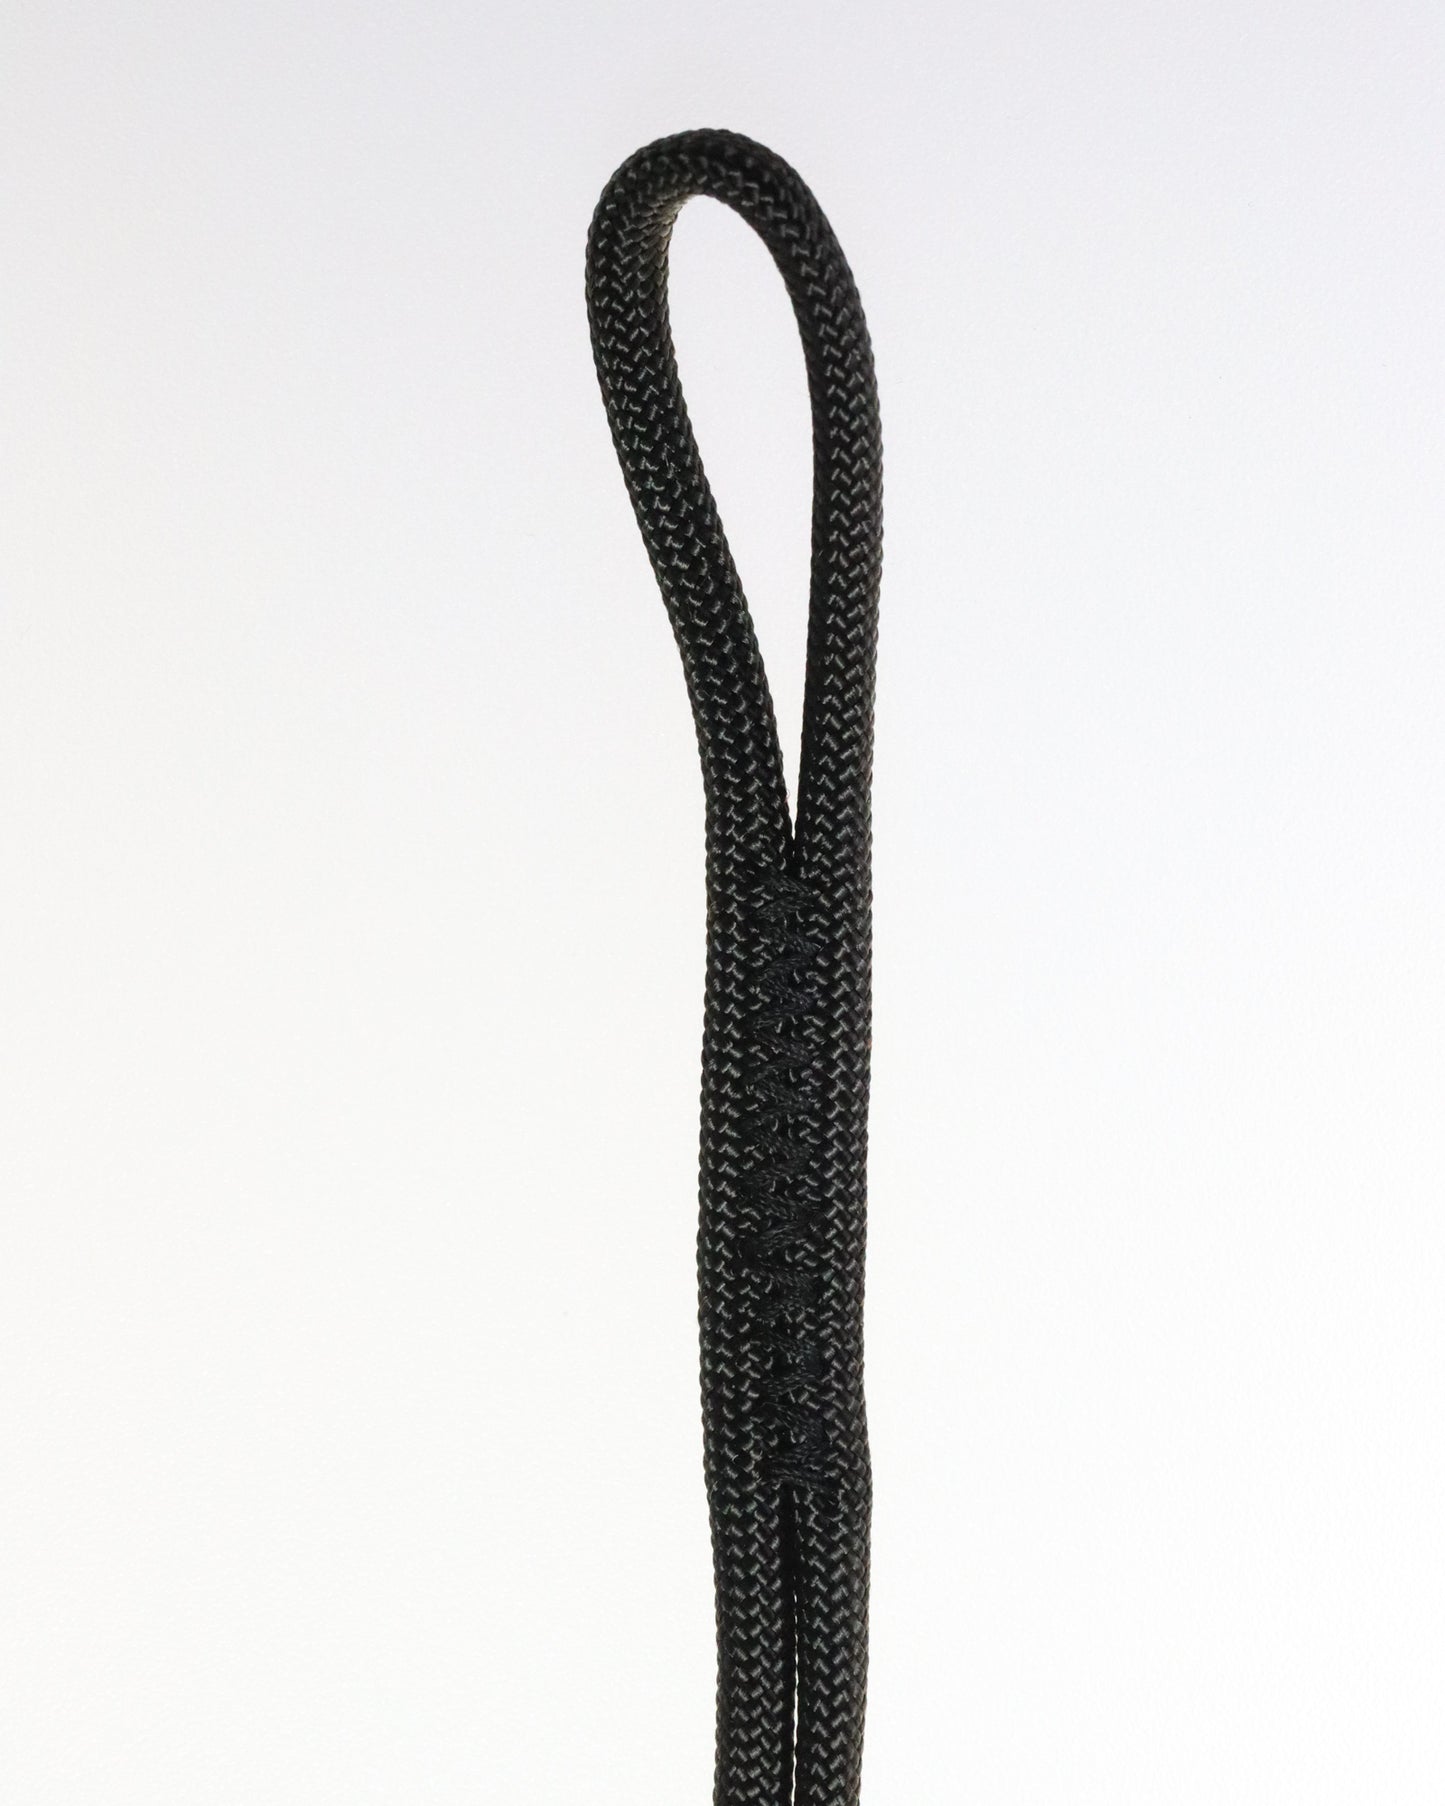 U.BAG Strap Extension made from paracord in color black